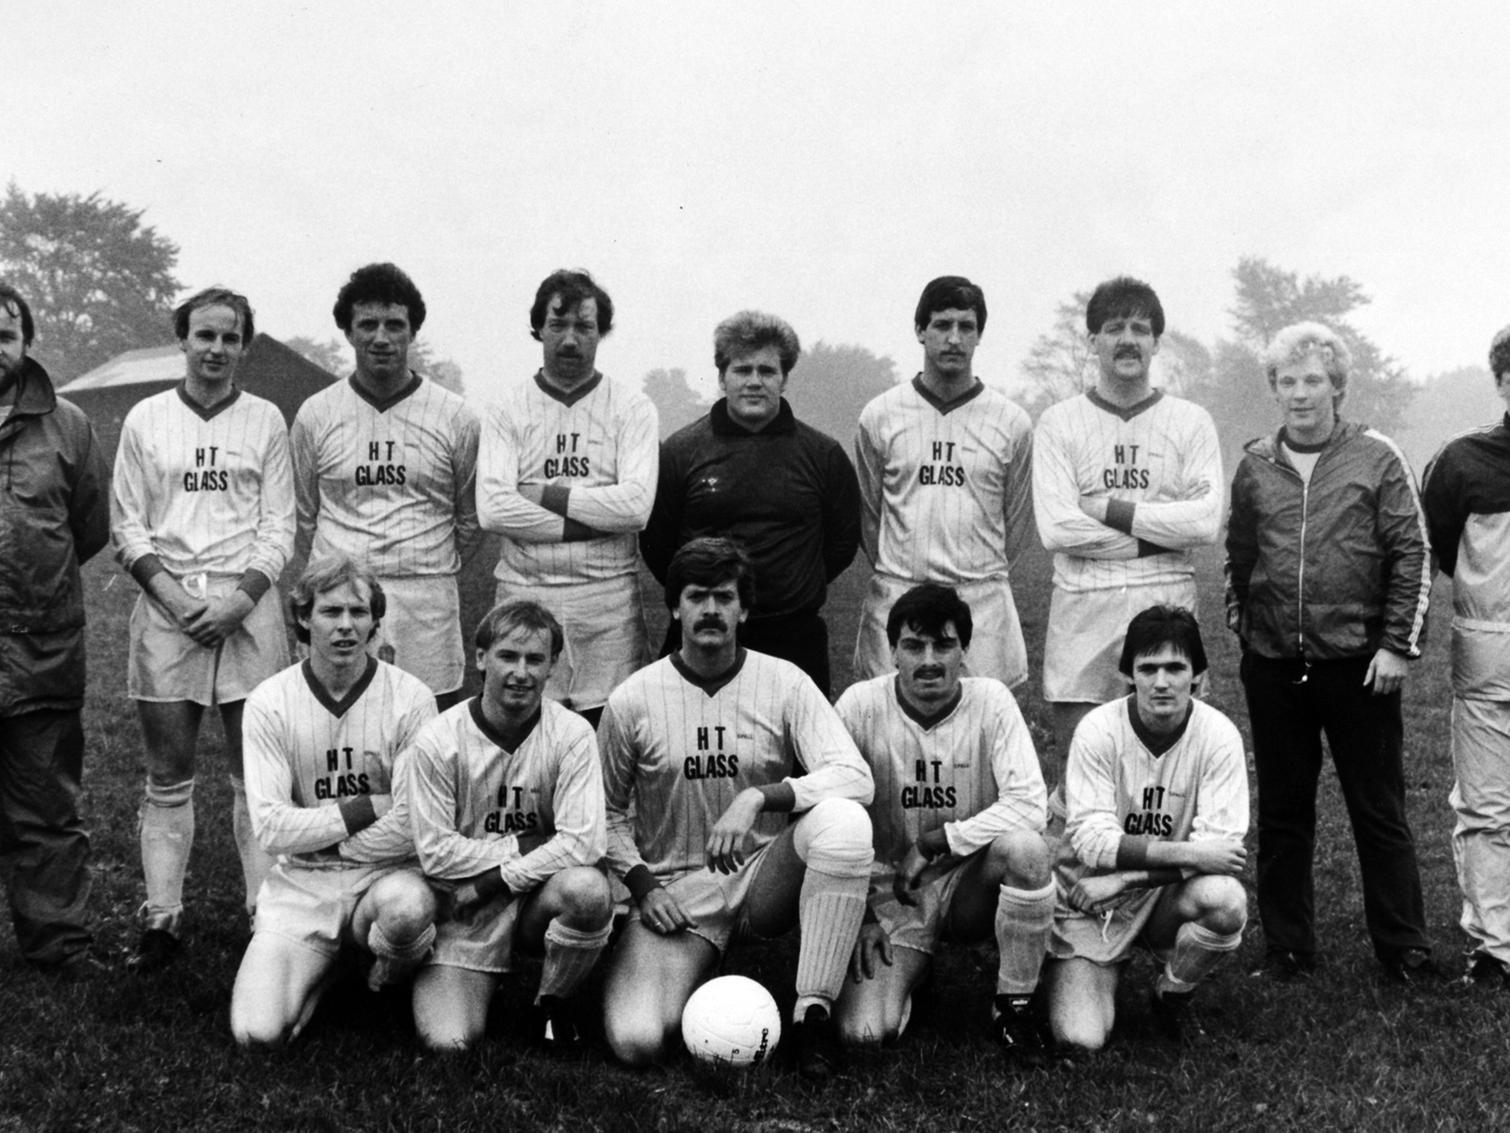 Back: Colin Felton (manager), Malcolm Rushfirth, Mark Broadley, Dennis Roberts, Phil Biddles, Steve Sparling, Les Robinson, Dave Weed and Paul Childs. Front: Paul Loft, Mick Routh, John Flynn (captain), Tony Clarke and Peter Scott.